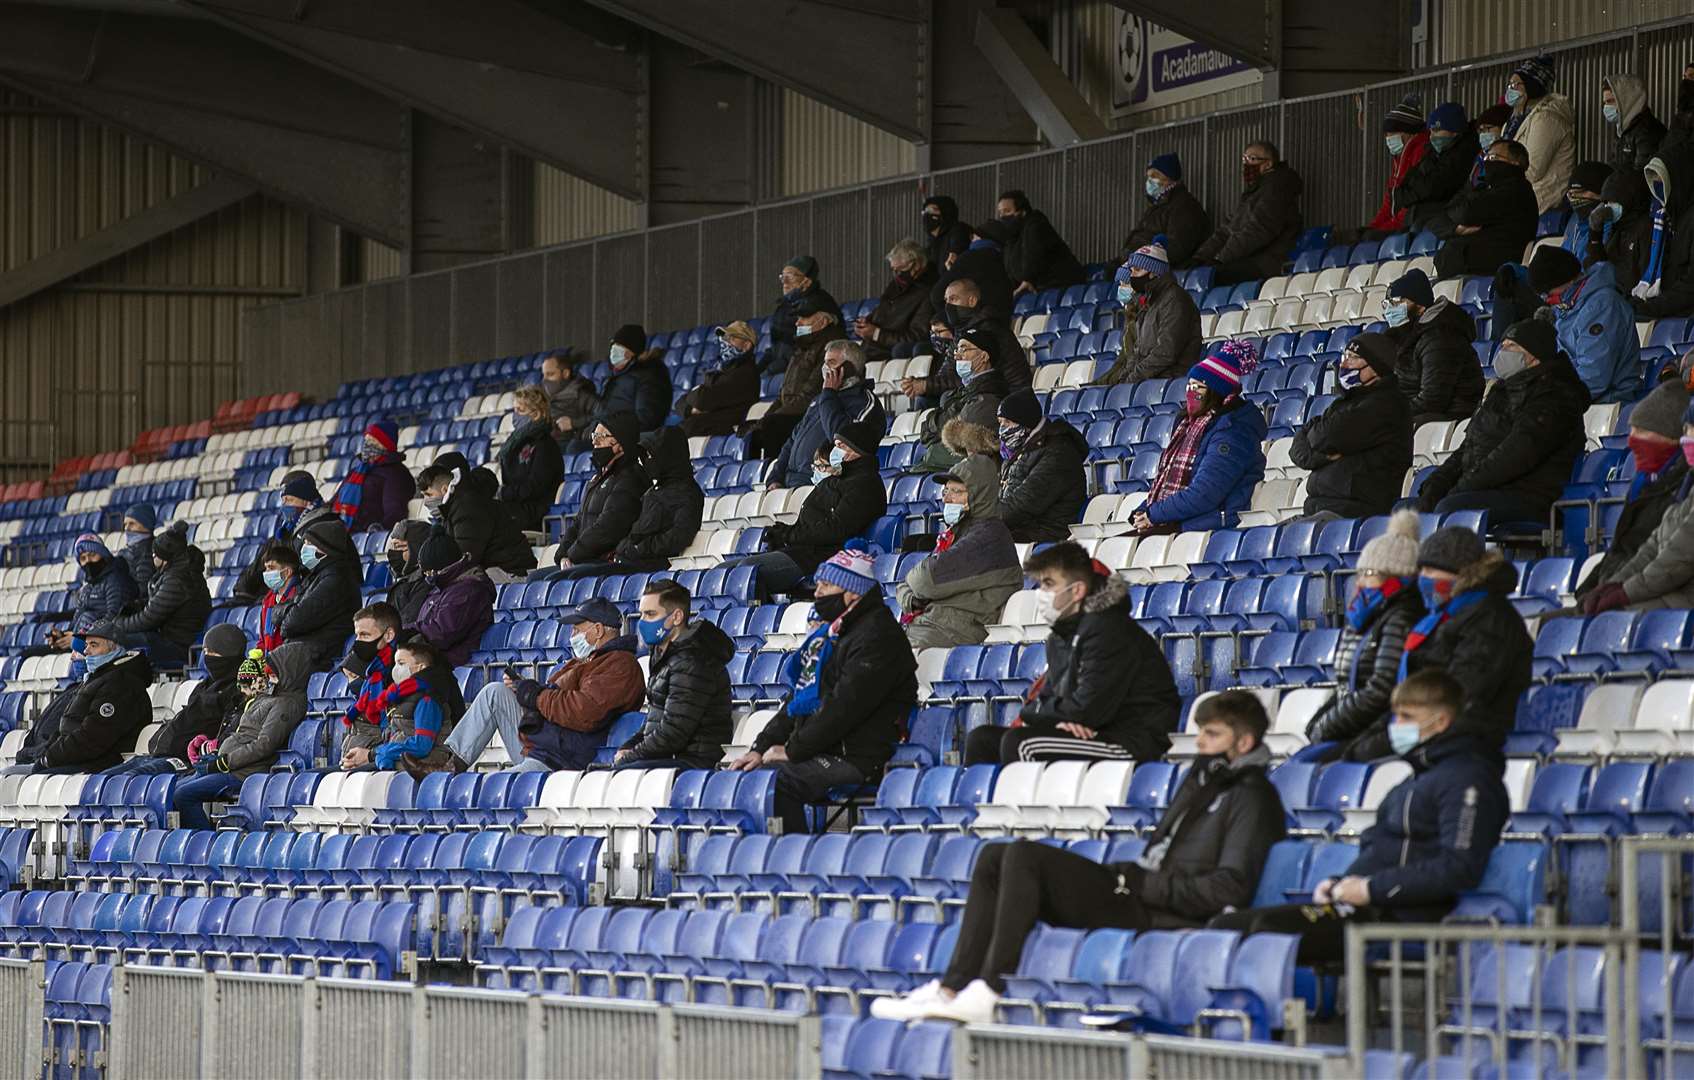 Picture - Ken Macpherson, Inverness. Some of the lucky ticket-holders who got to attend their first game of the season.